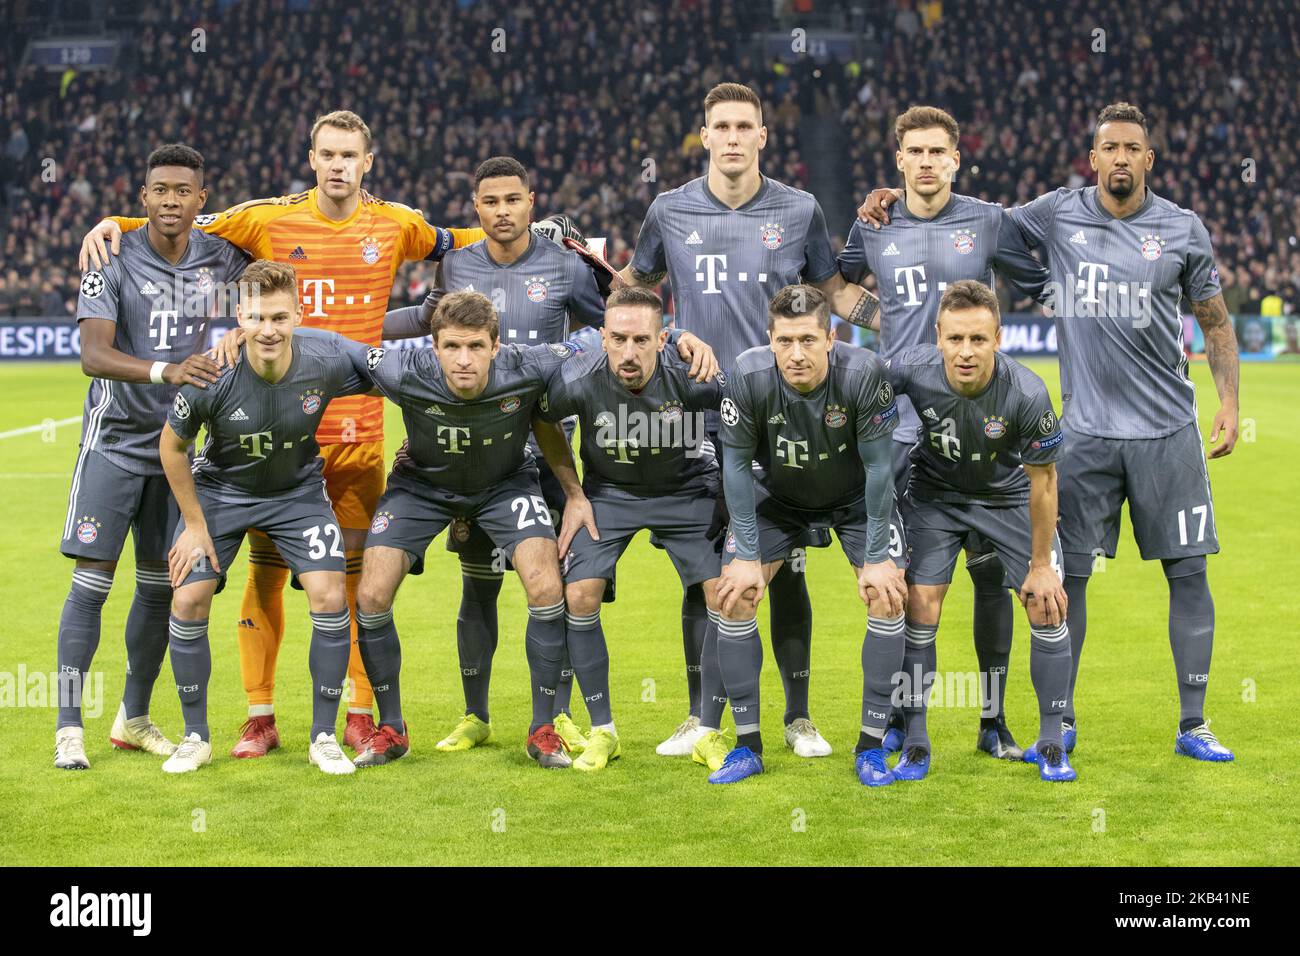 Afc ajax football team hi-res stock photography and images - Alamy